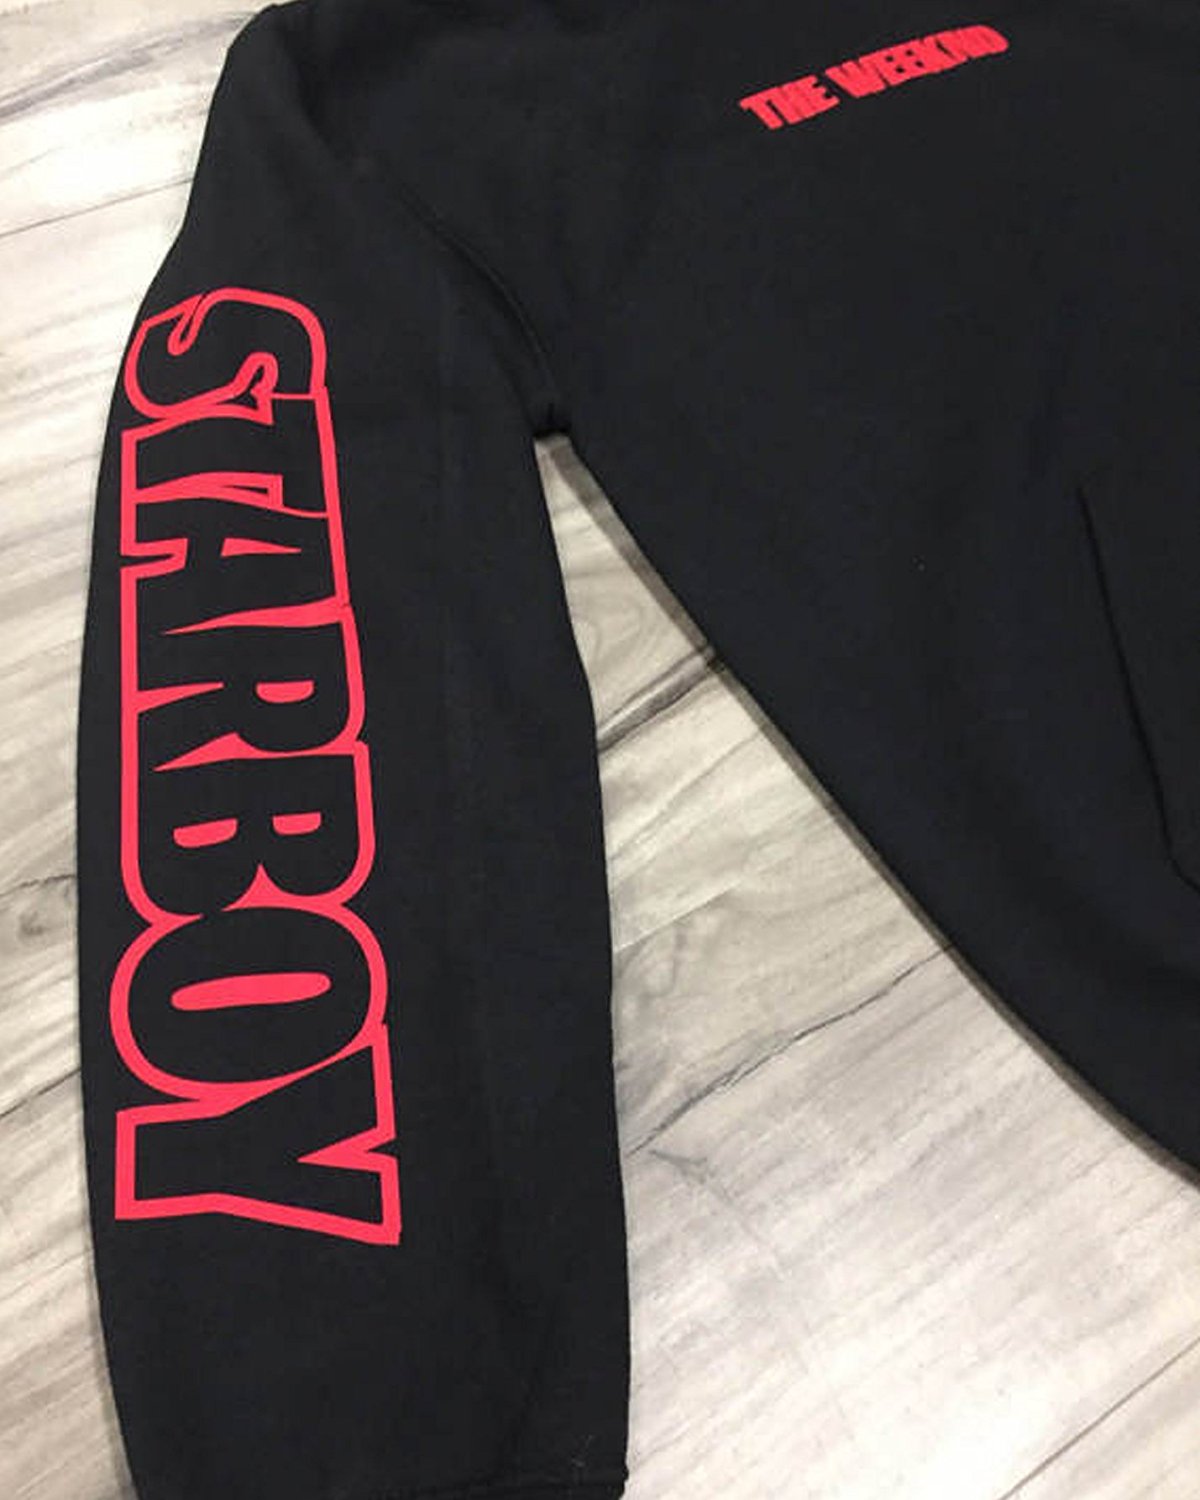 The Weeknd Starboy Hoodie size Large for Sale in San Antonio, TX